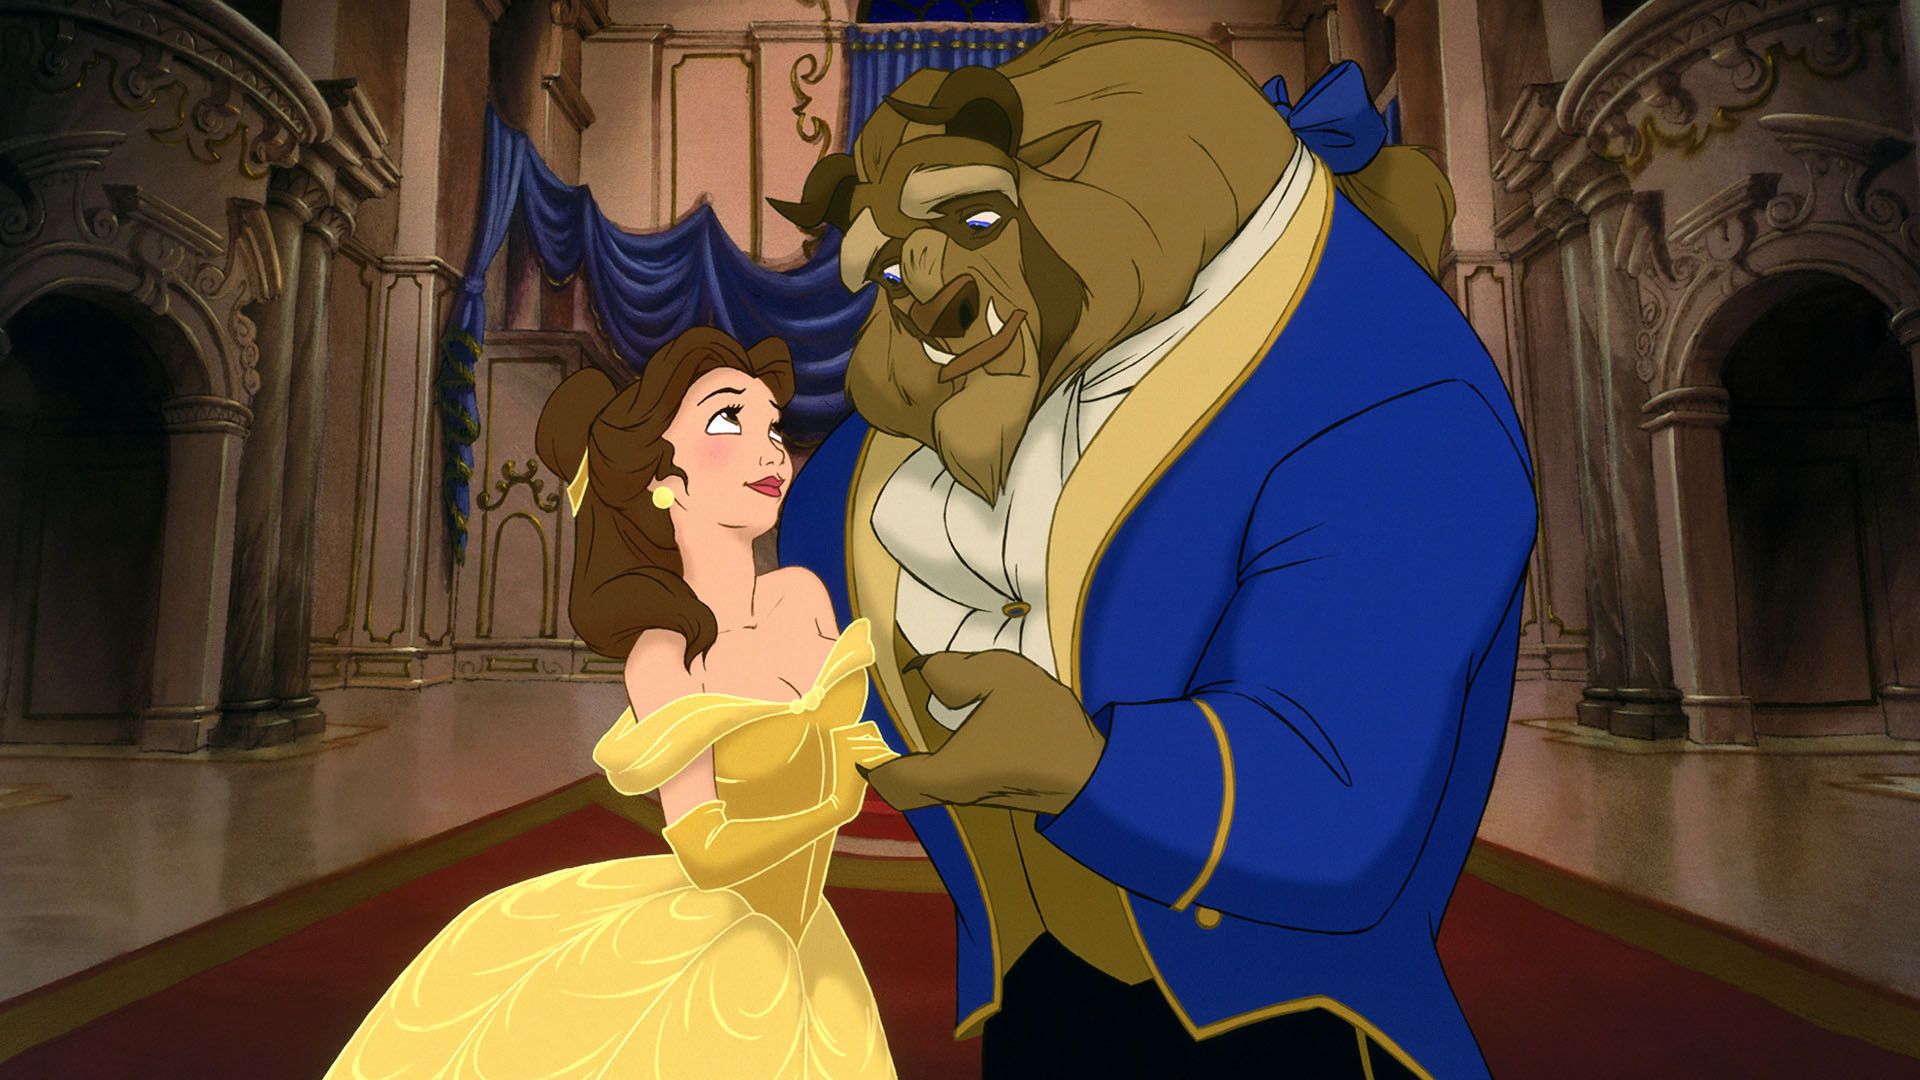 Beauty And The Beast [1991]